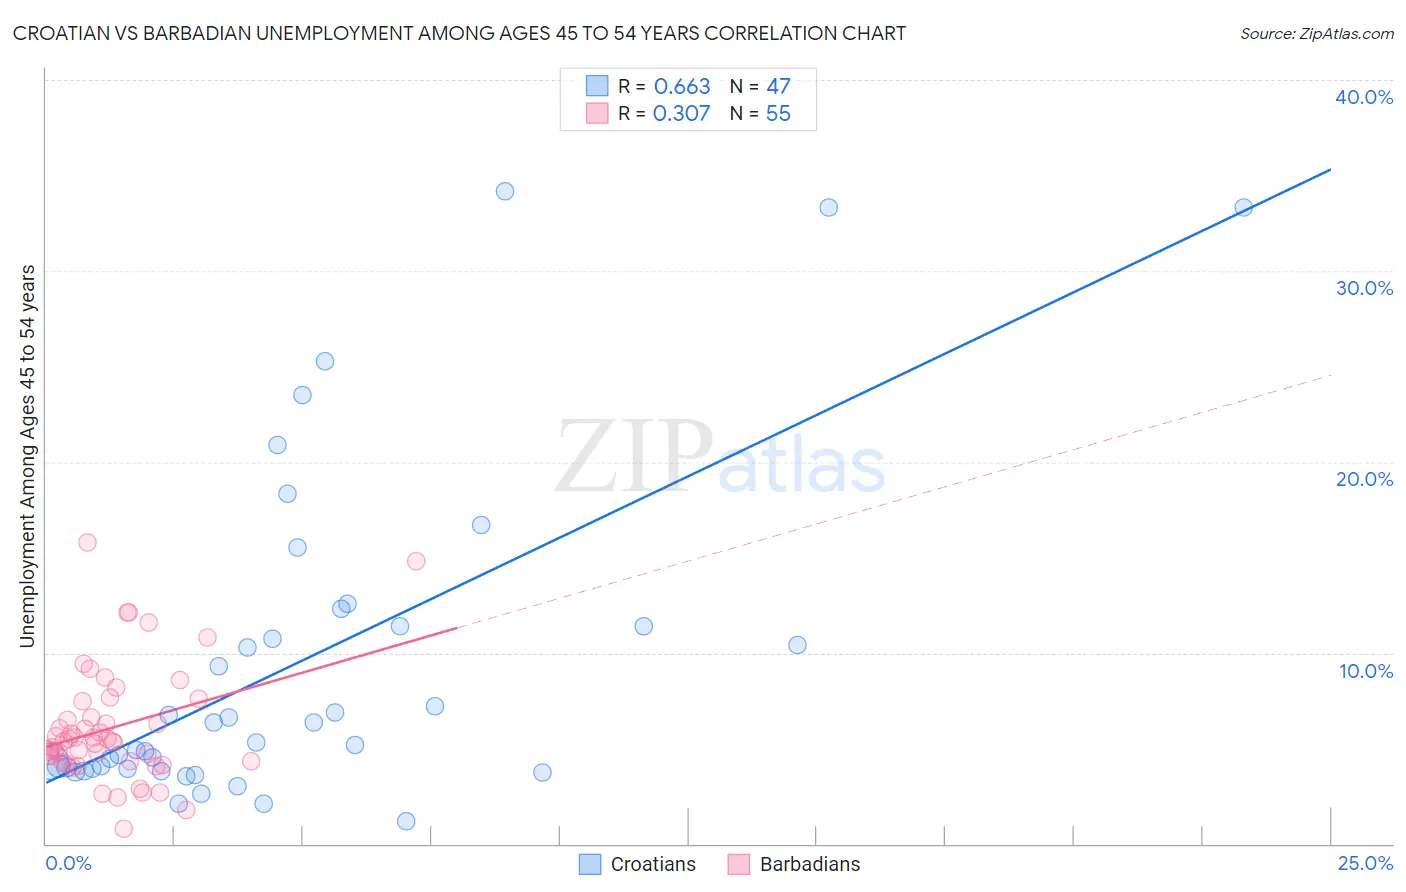 Croatian vs Barbadian Unemployment Among Ages 45 to 54 years